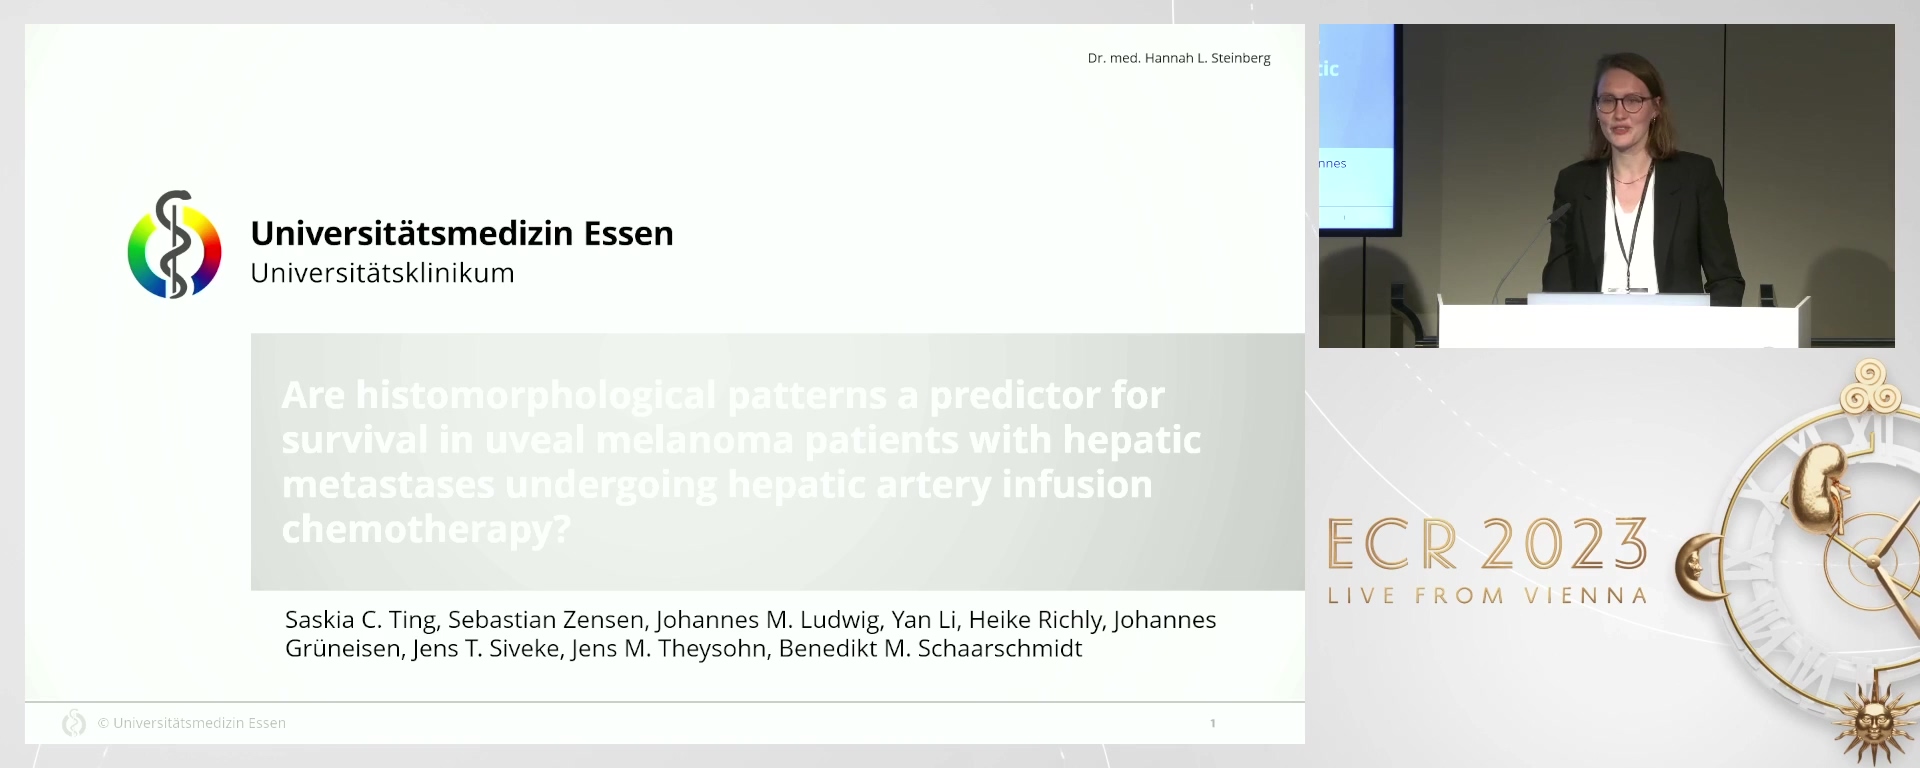 Are histomorphological patterns a predictor for survival in uveal melanoma patients with hepatic metastases undergoing hepatic artery infusion chemotherapy?